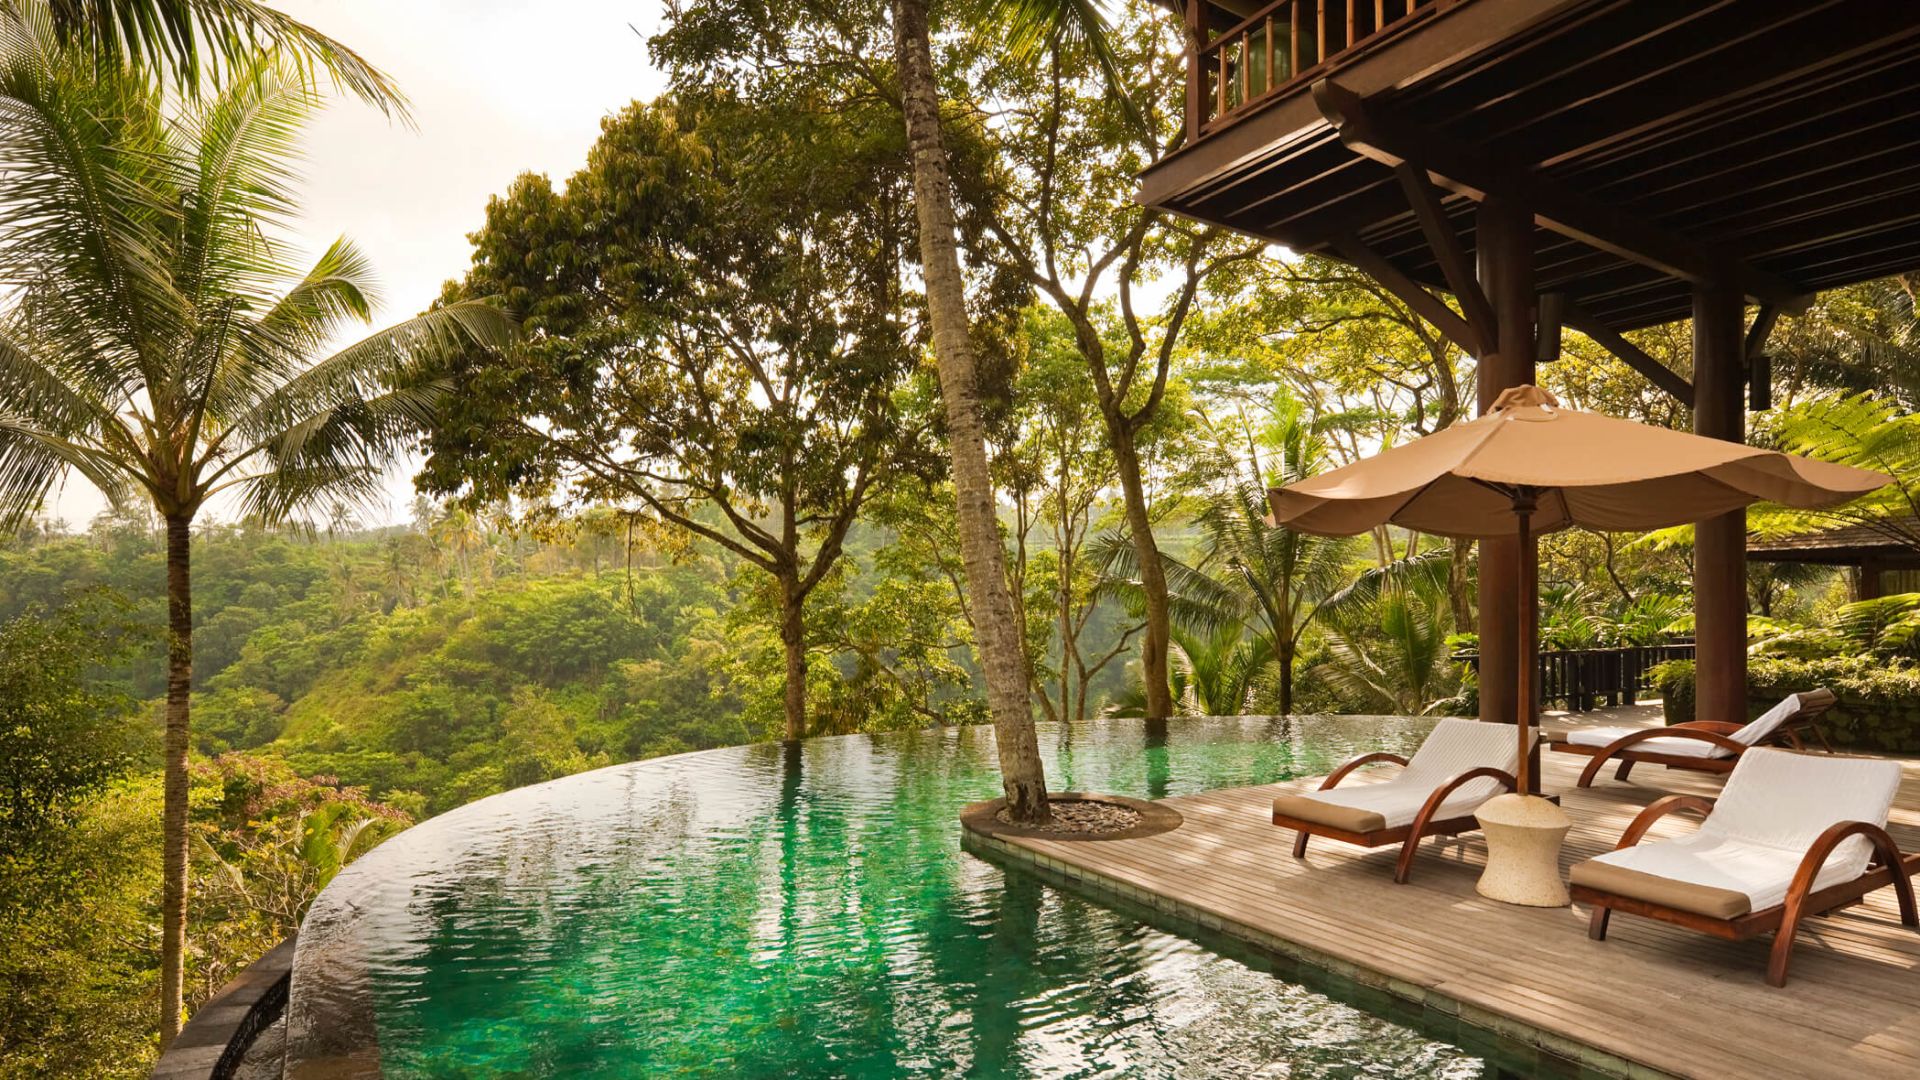 WIN A LUXURY HOLIDAY IN BALI, INDONESIA